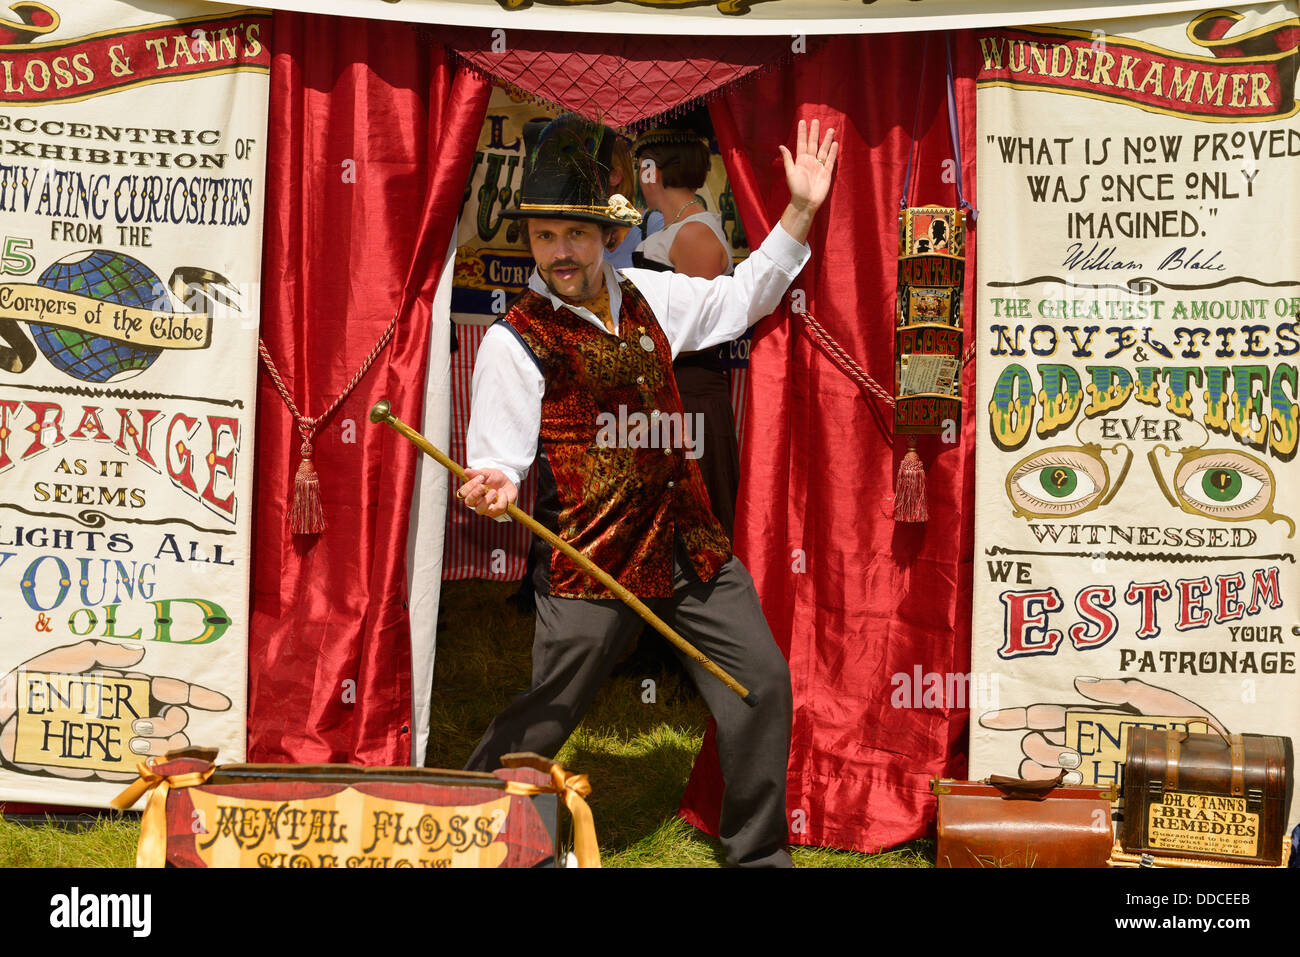 Sideshow e illusionista hustler a Coldwater Canadiana Heritage Museum steampunk festival Ontario Canada Foto Stock